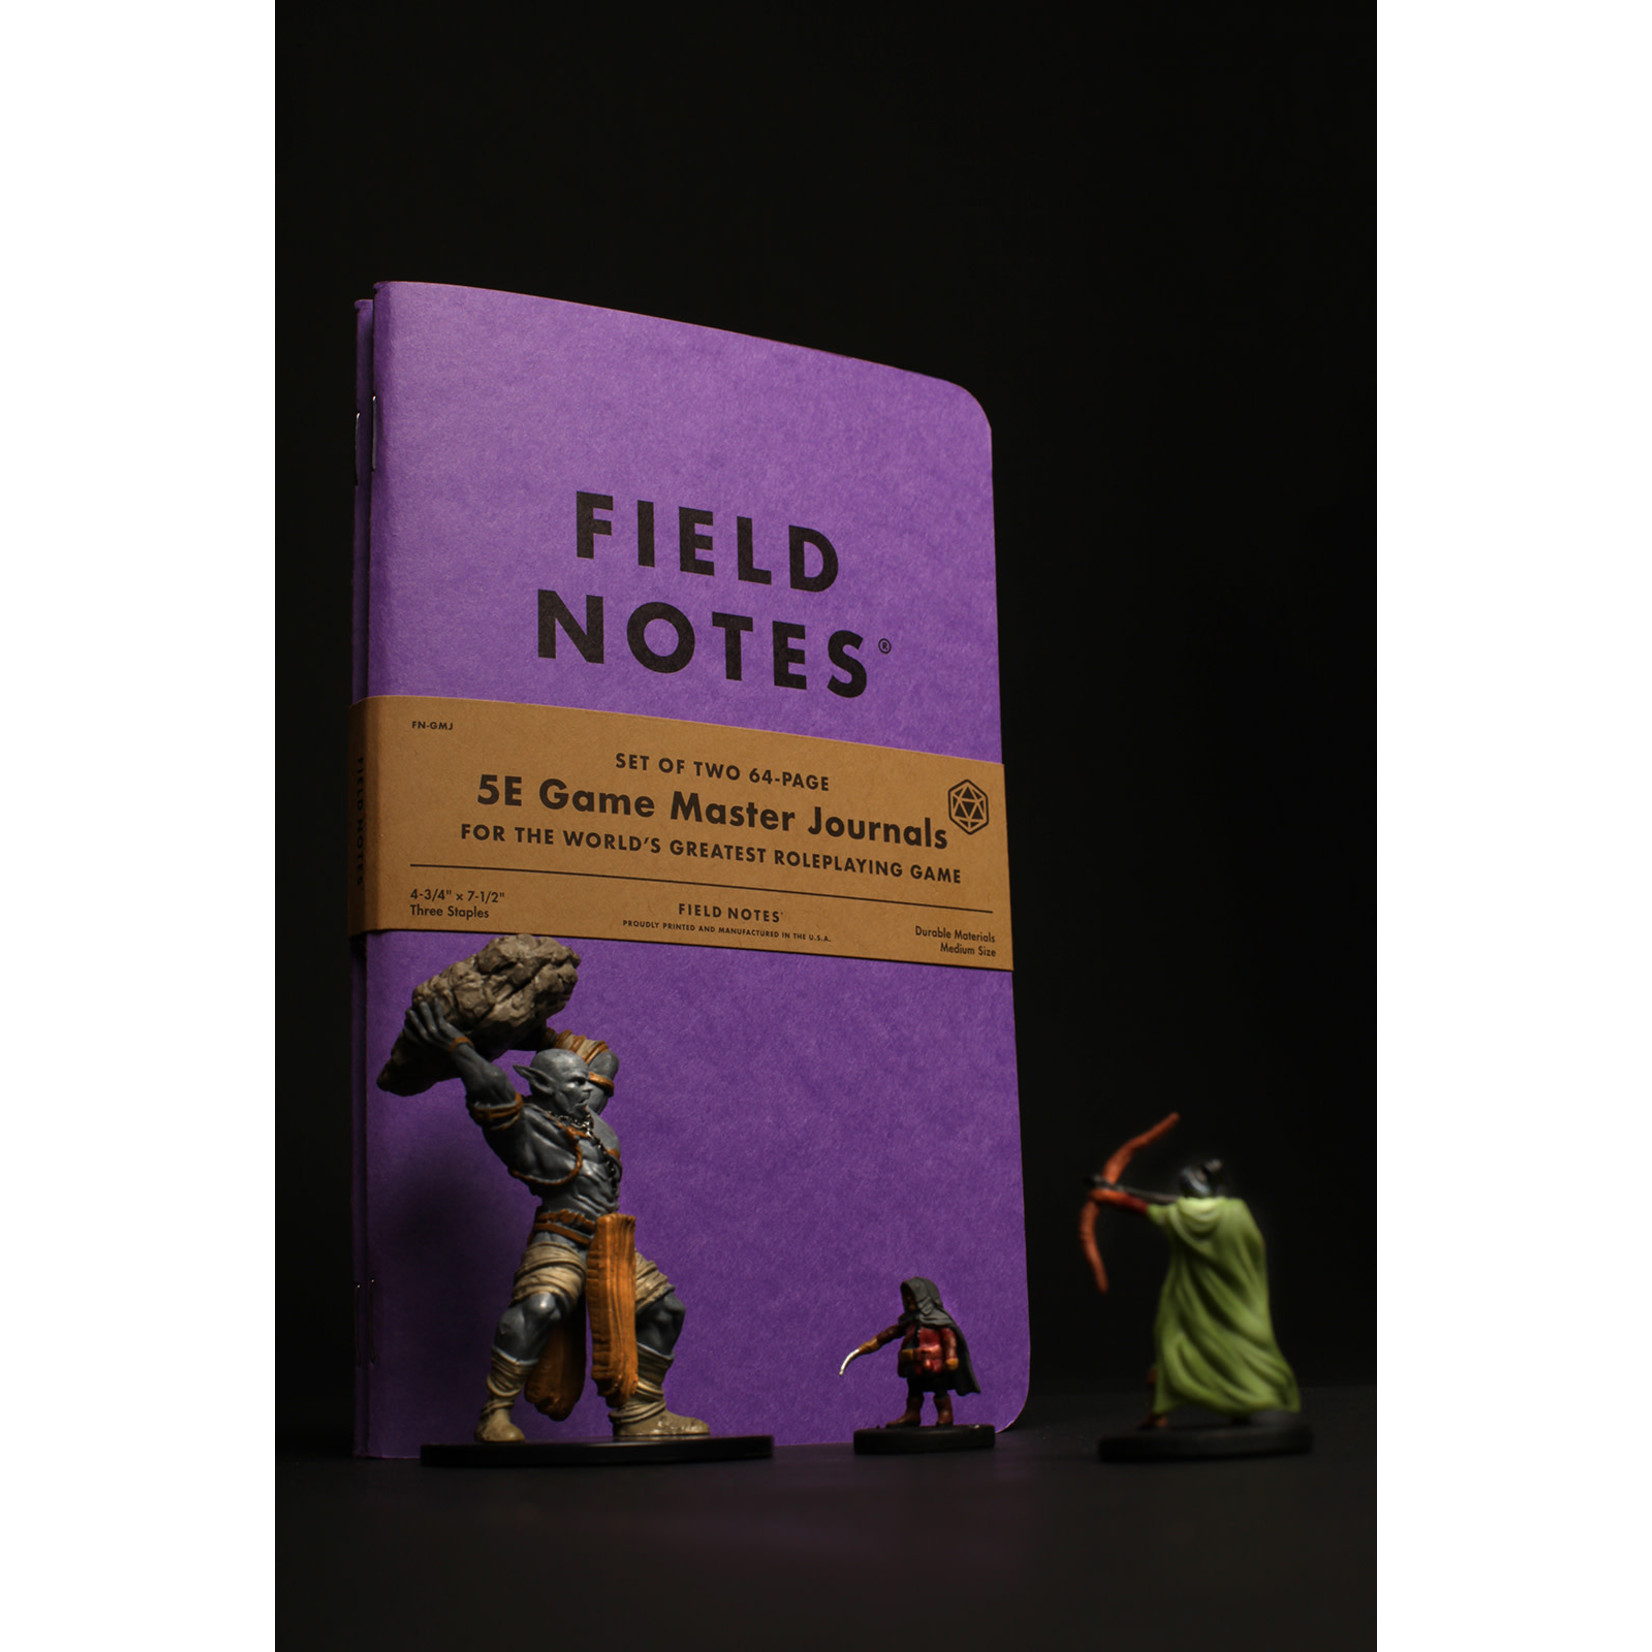 Field Notes 5E Game Master Journals (2 pack)